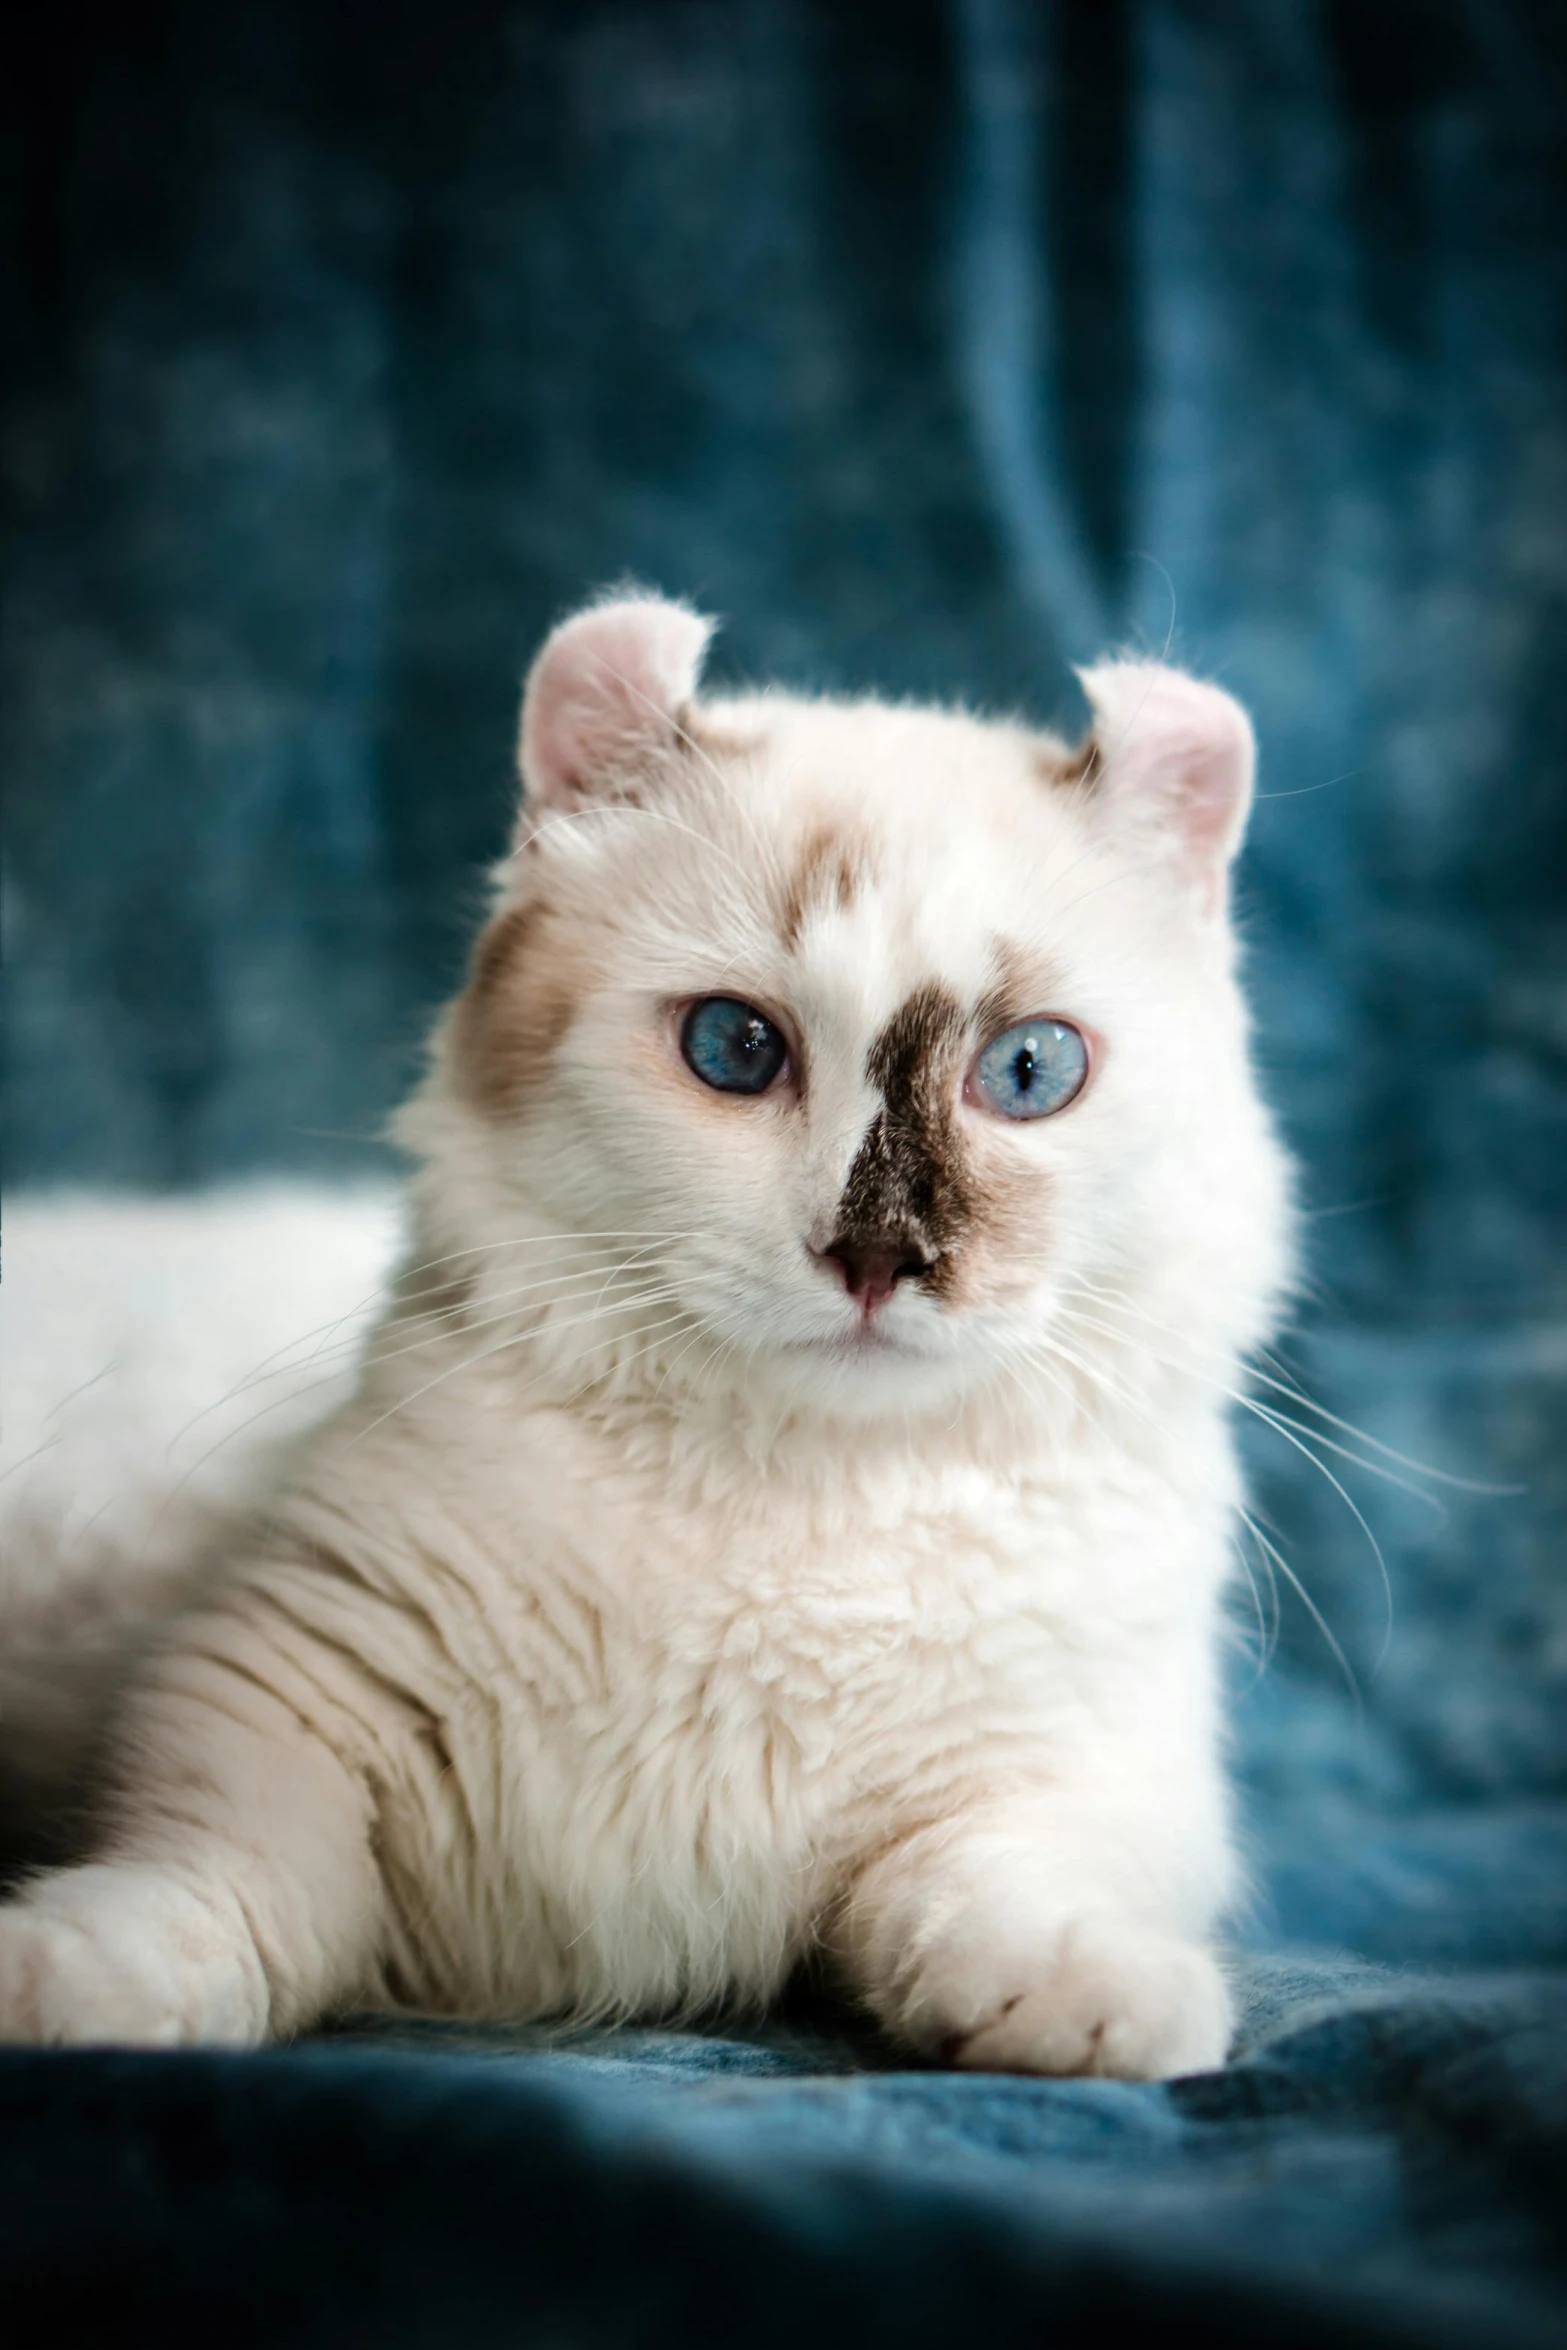 a white and tan cat with blue eyes sitting on blue fabric